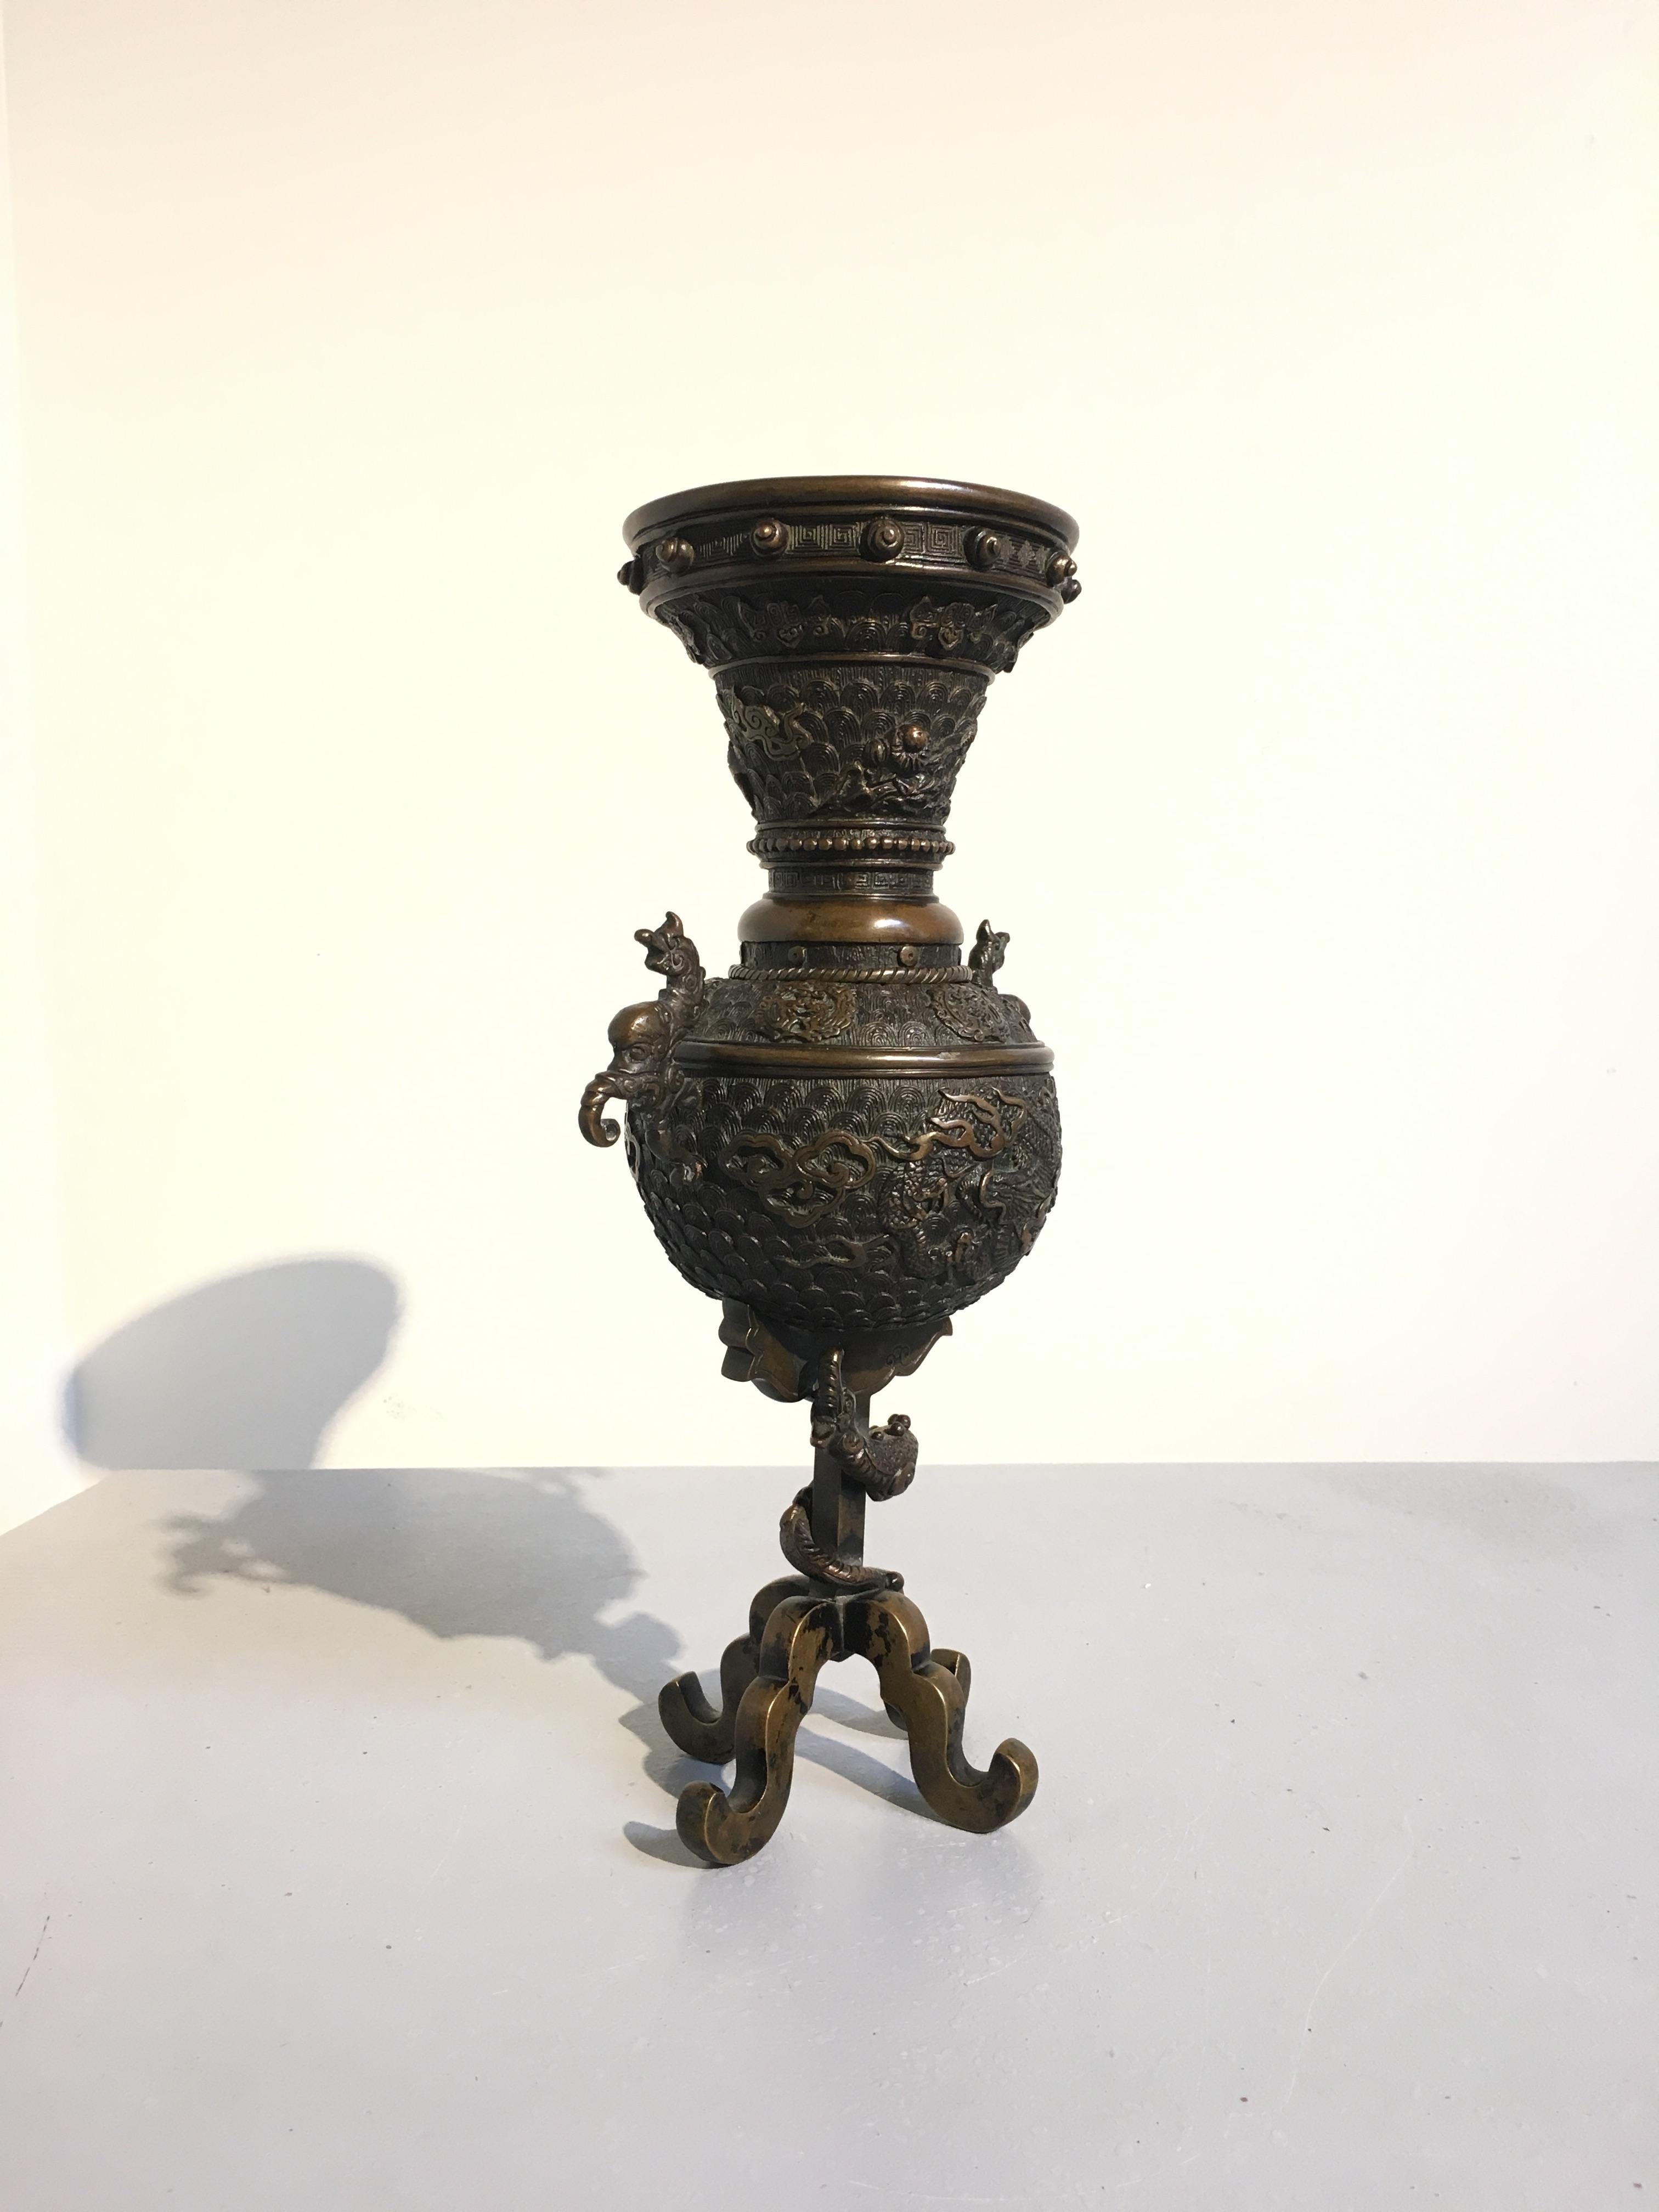 An exuberantly cast Japanese bronze vessel for ikebana flower arranging, called an usubata, Meiji Period, late 19th century. 

The vessel comprised of two parts. The neck detaches to allow easier access to interior of the vase. The body of the